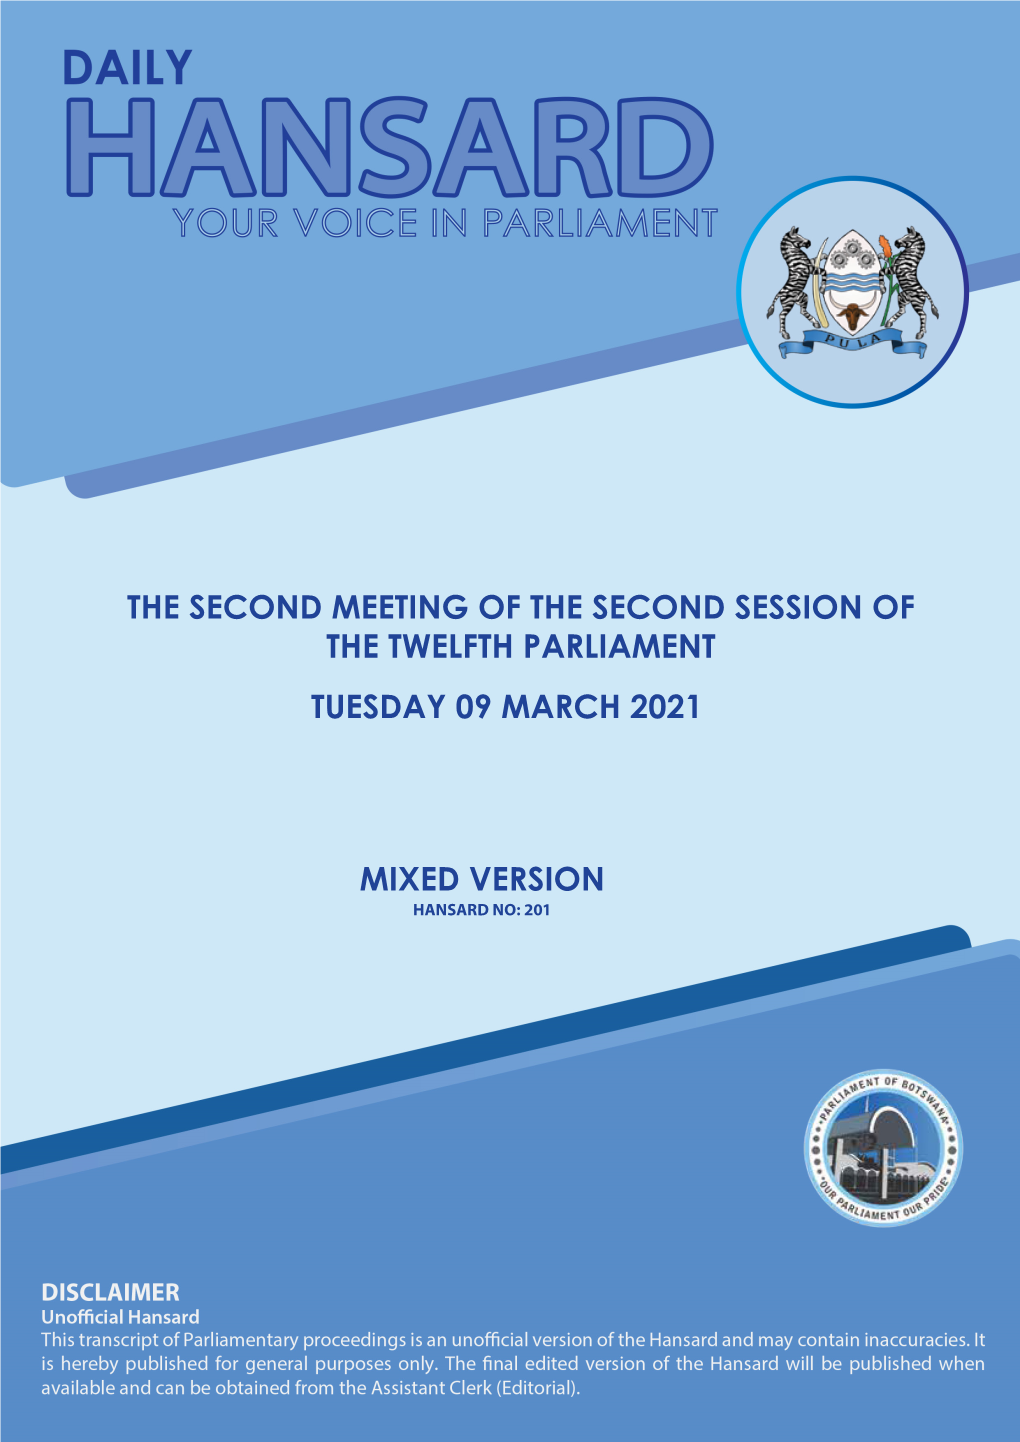 Tuesday 09 March 2021 the Second Meeting of The